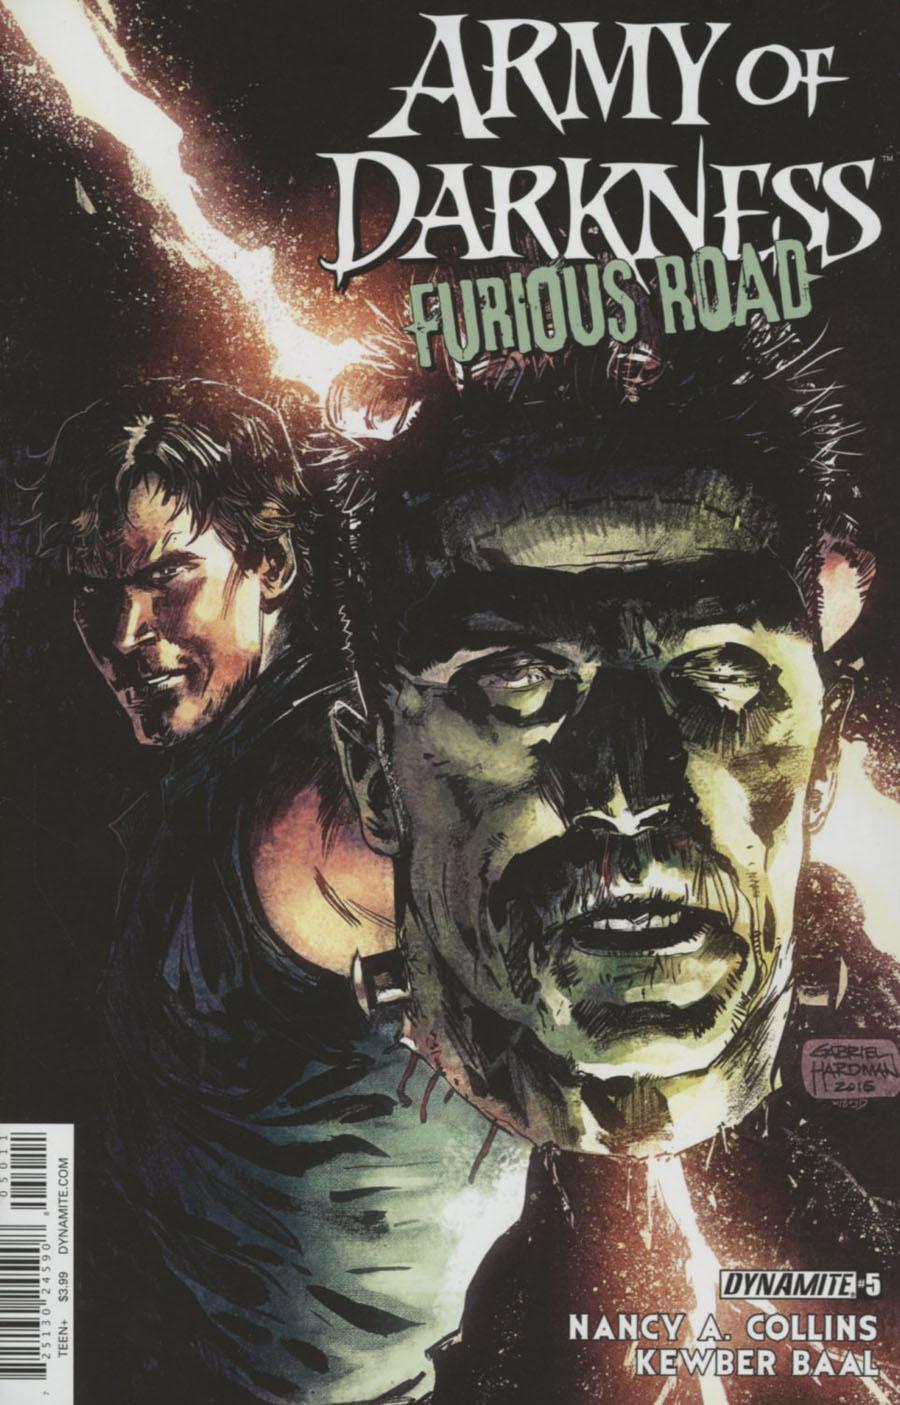 Army Of Darkness Furious Road Vol. 1 #5